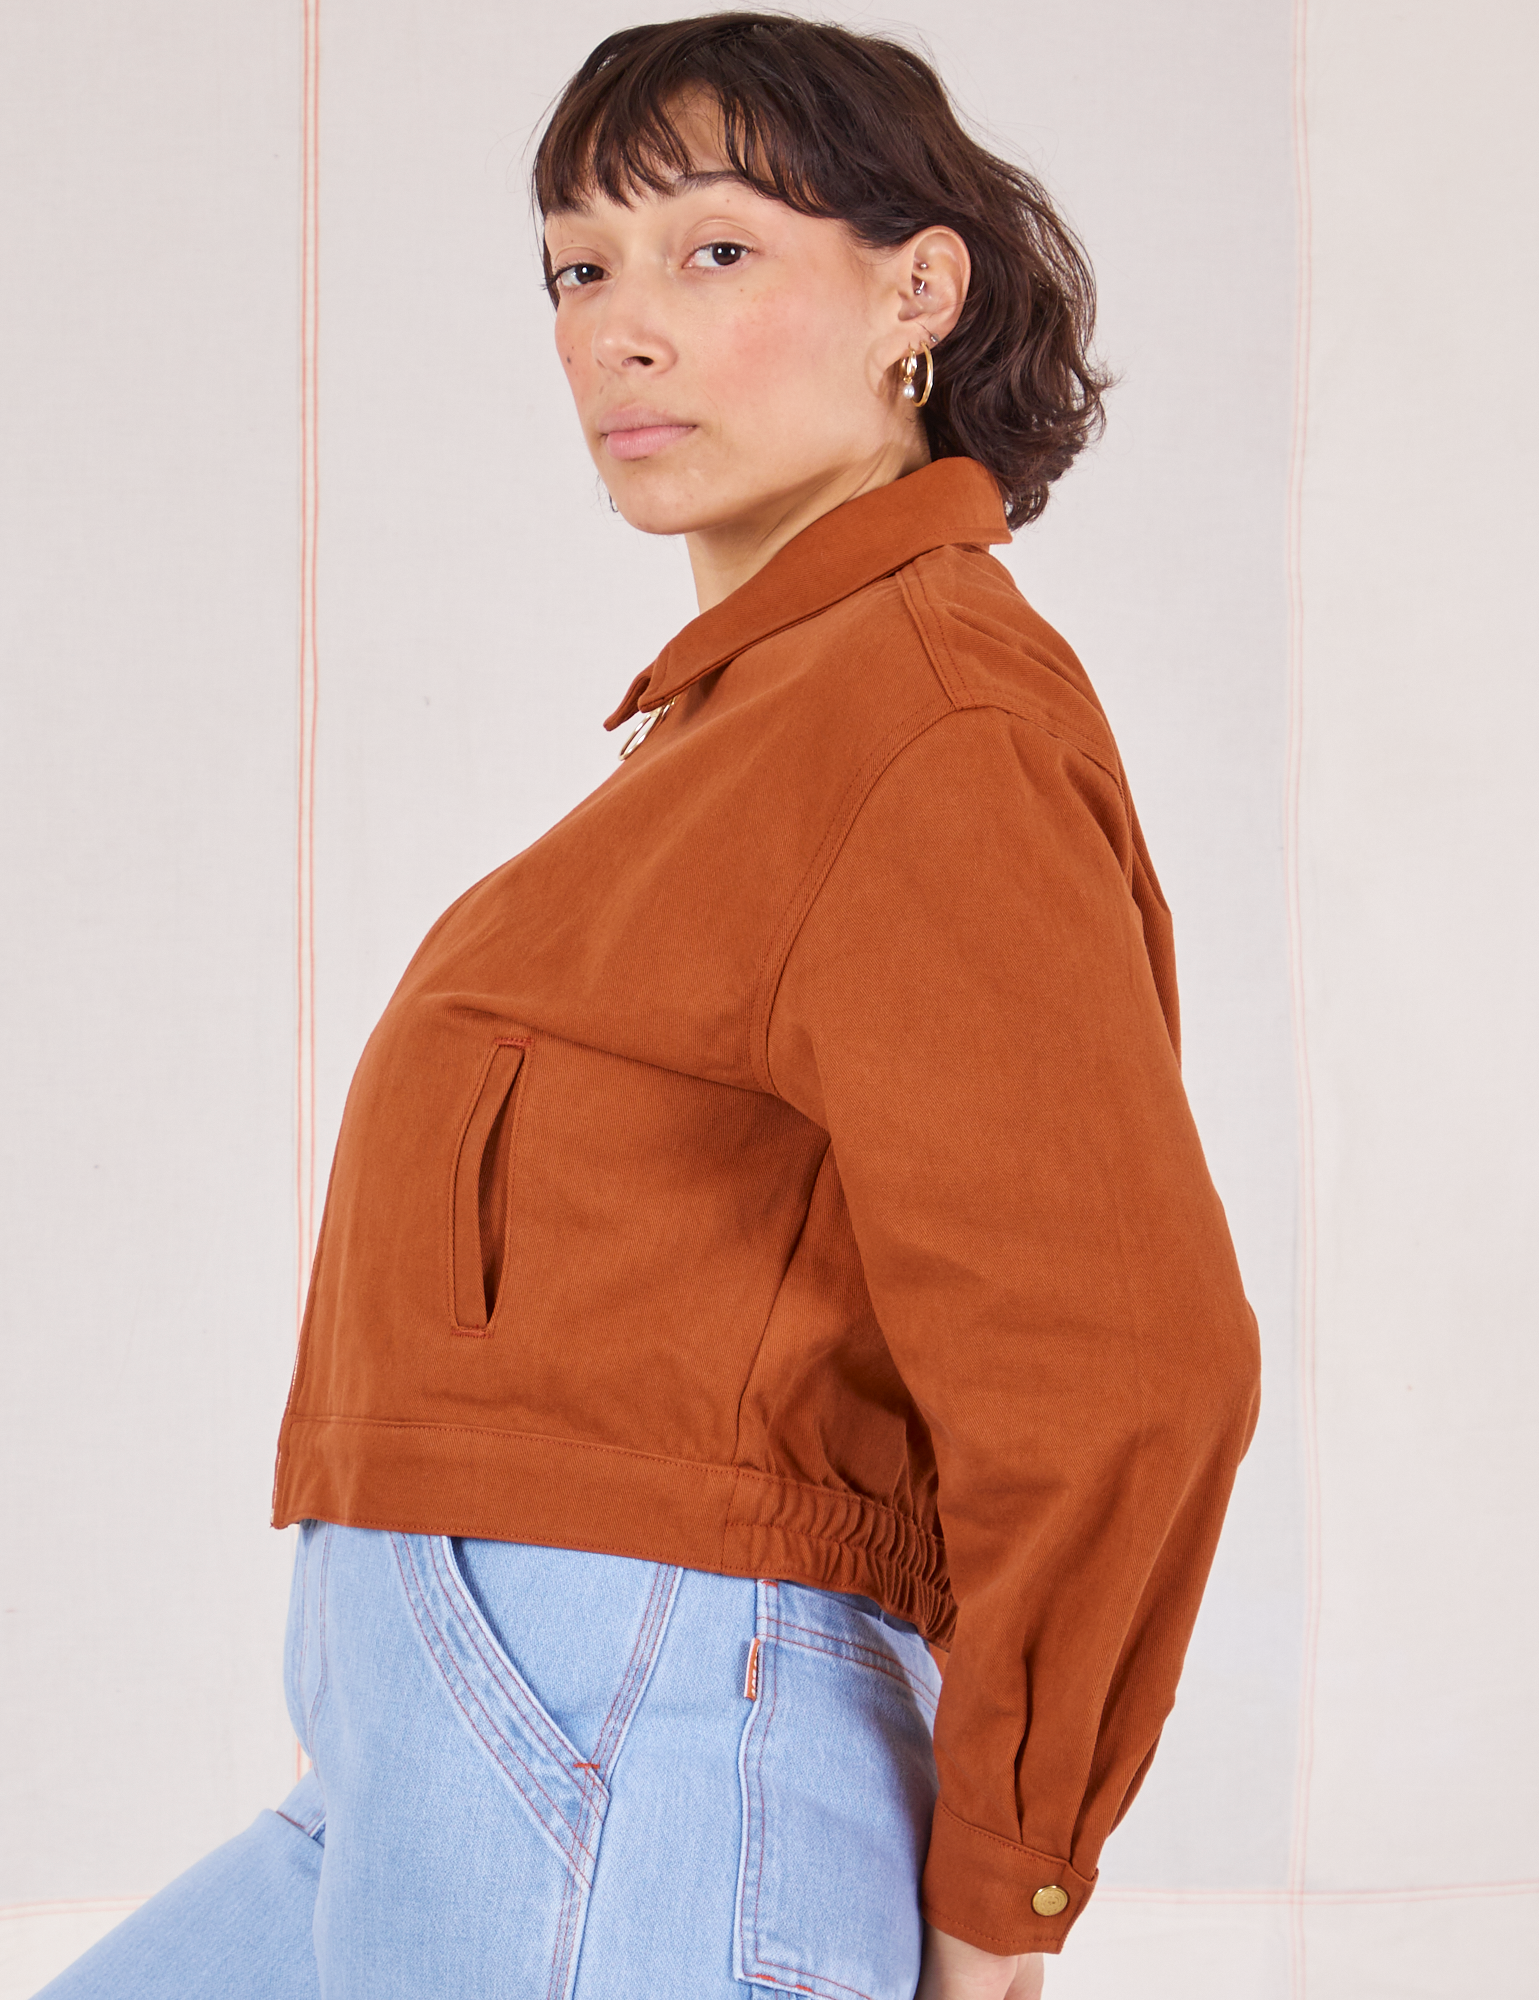 Ricky Jacket in Burnt Terracotta side view on Tiara